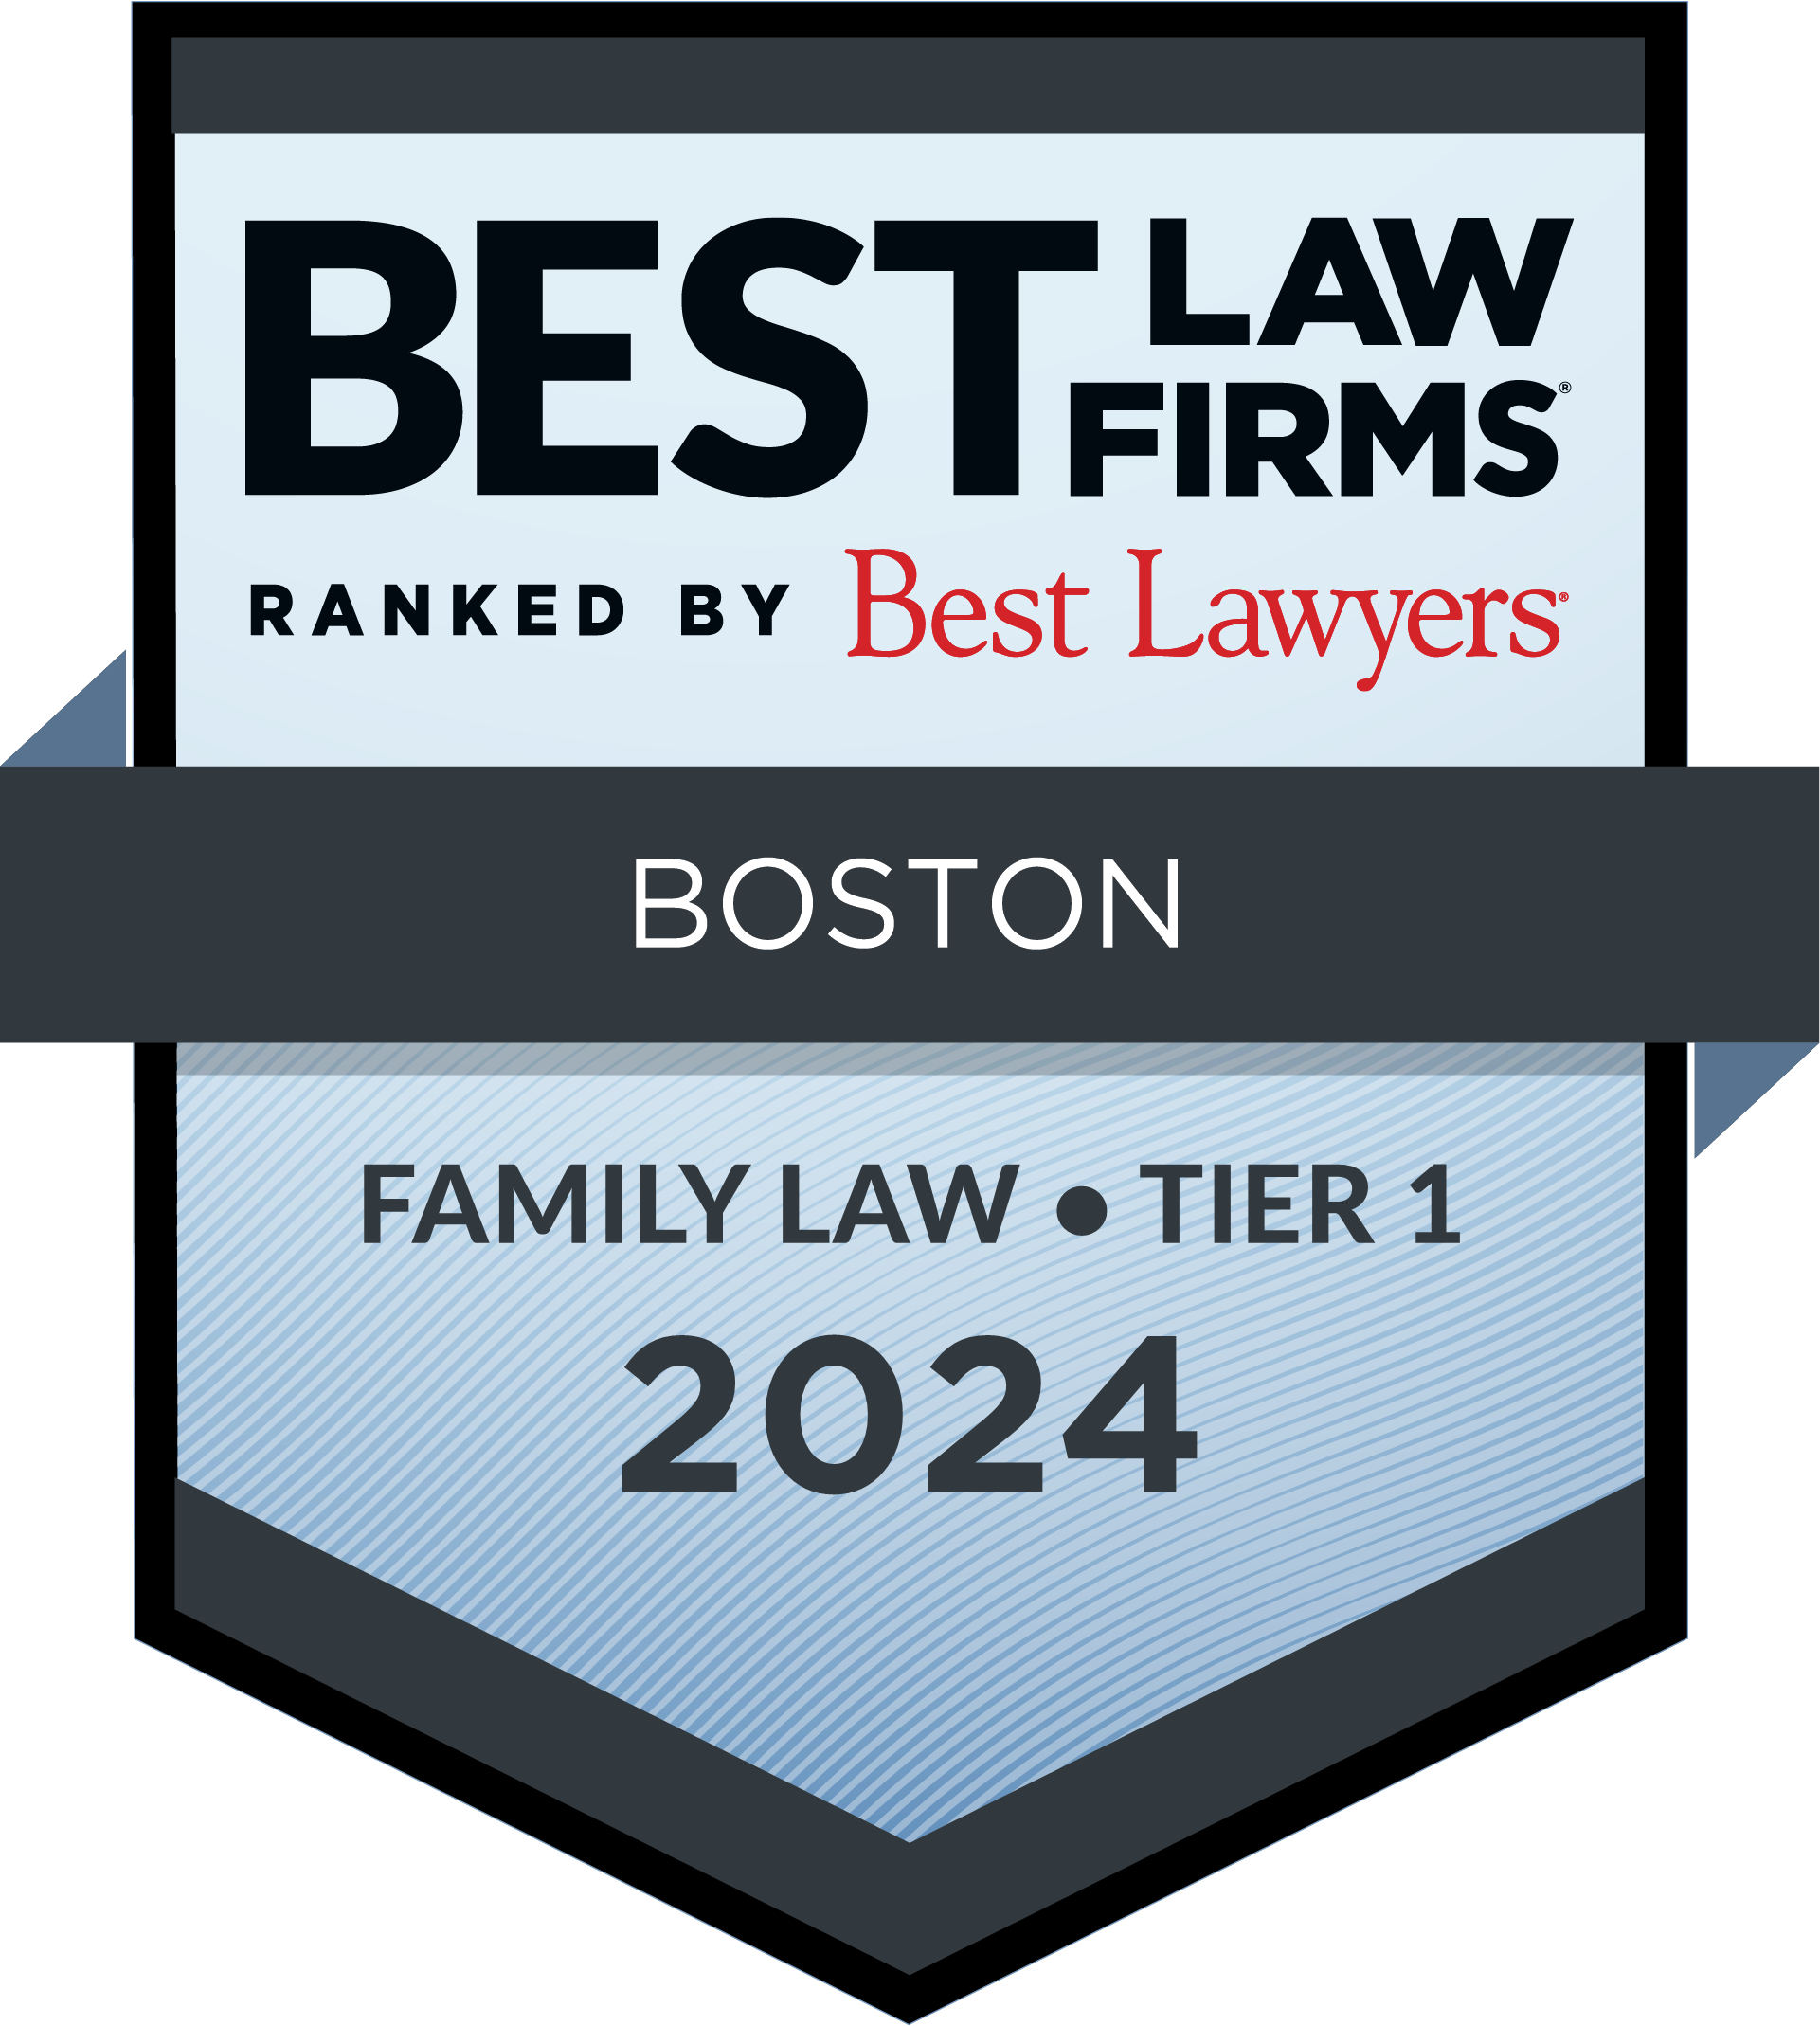 Best Law Firms 2024 - Family Law Tier 1